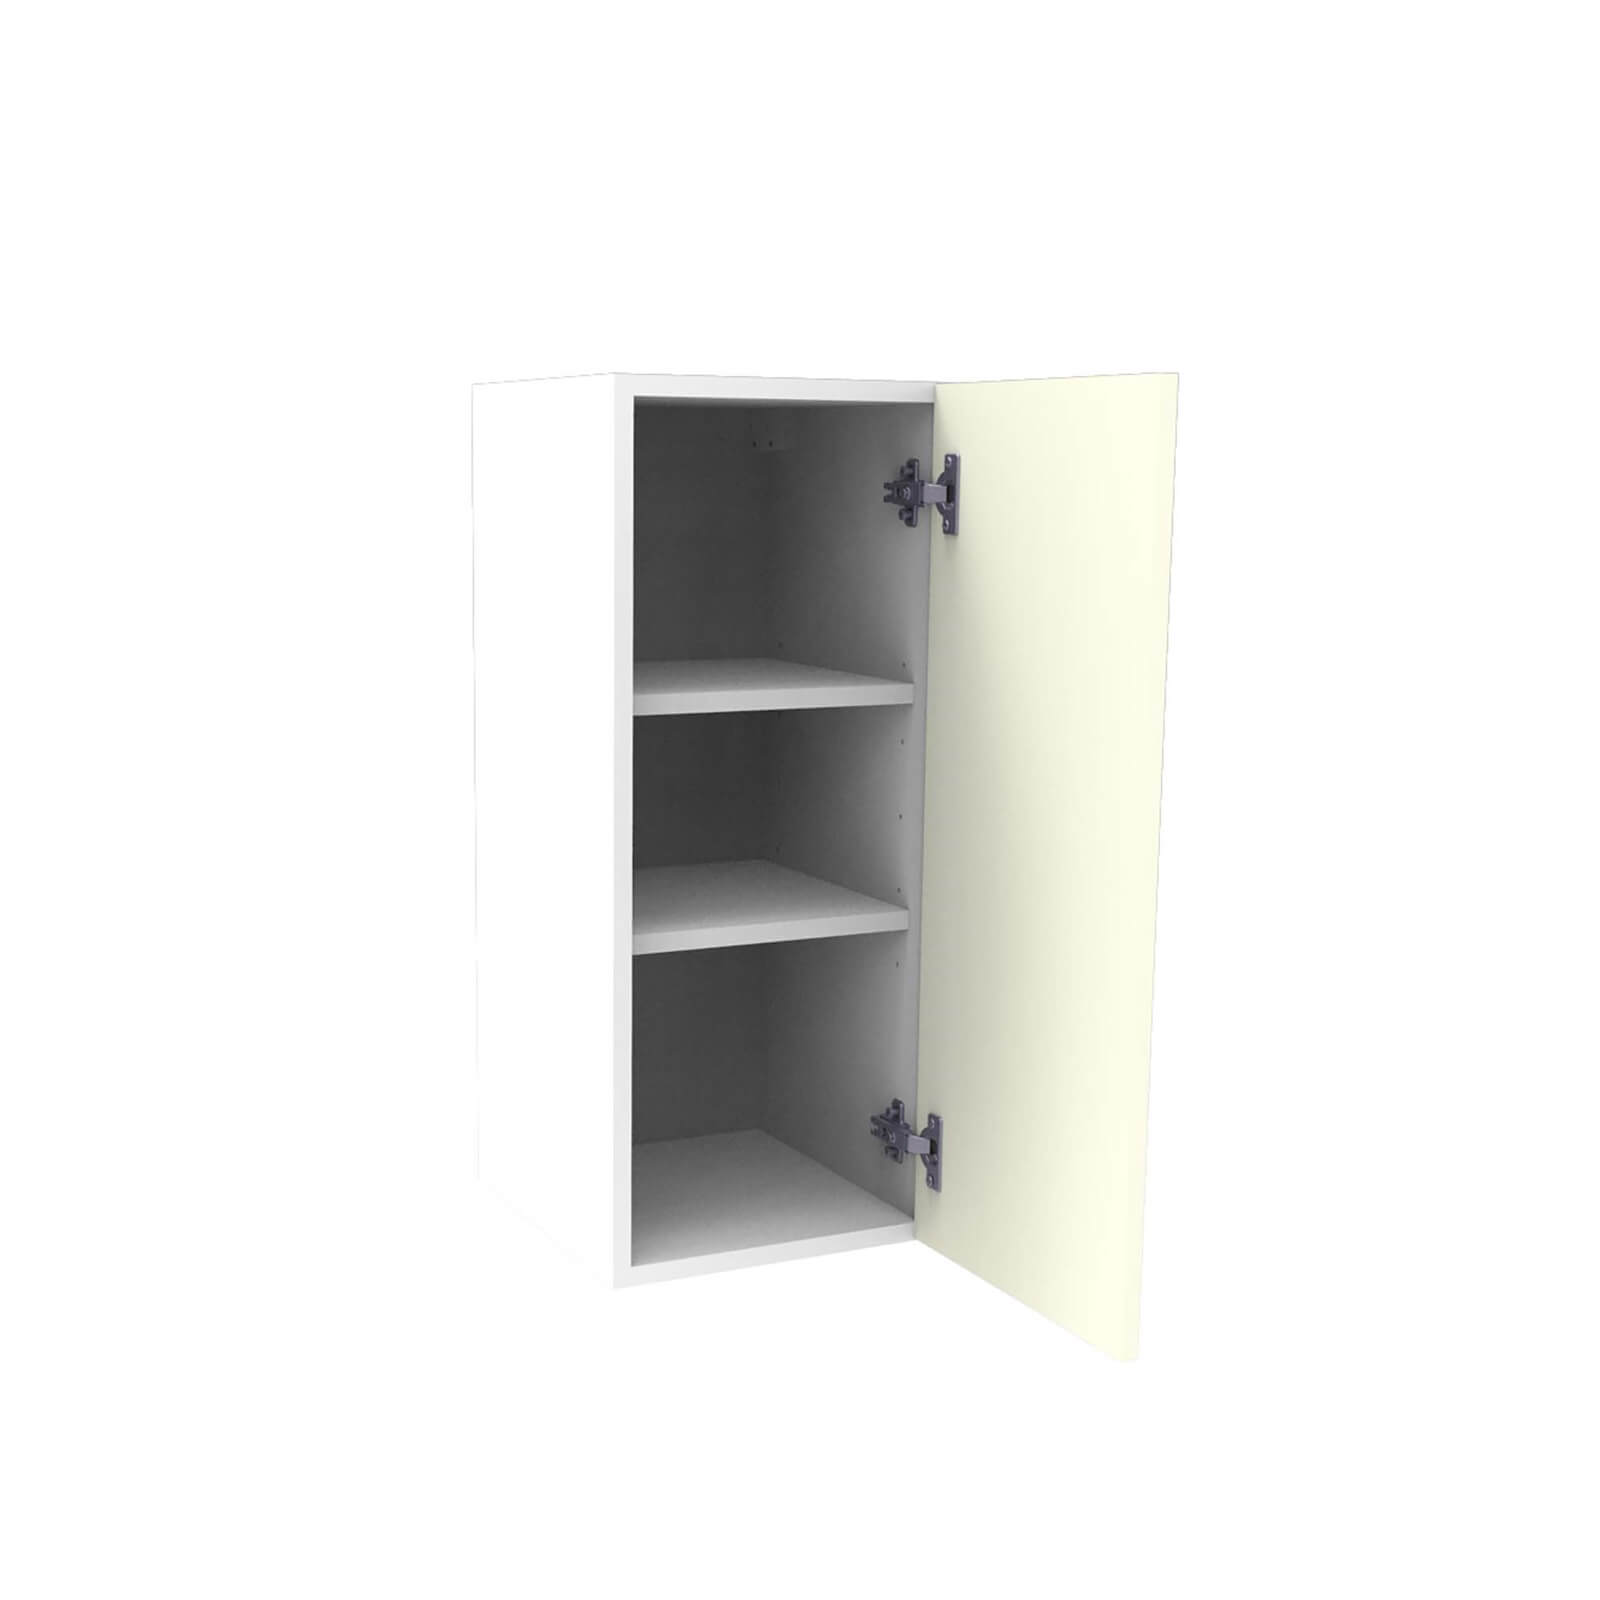 Country Shaker Cream 300mm Wall Unit